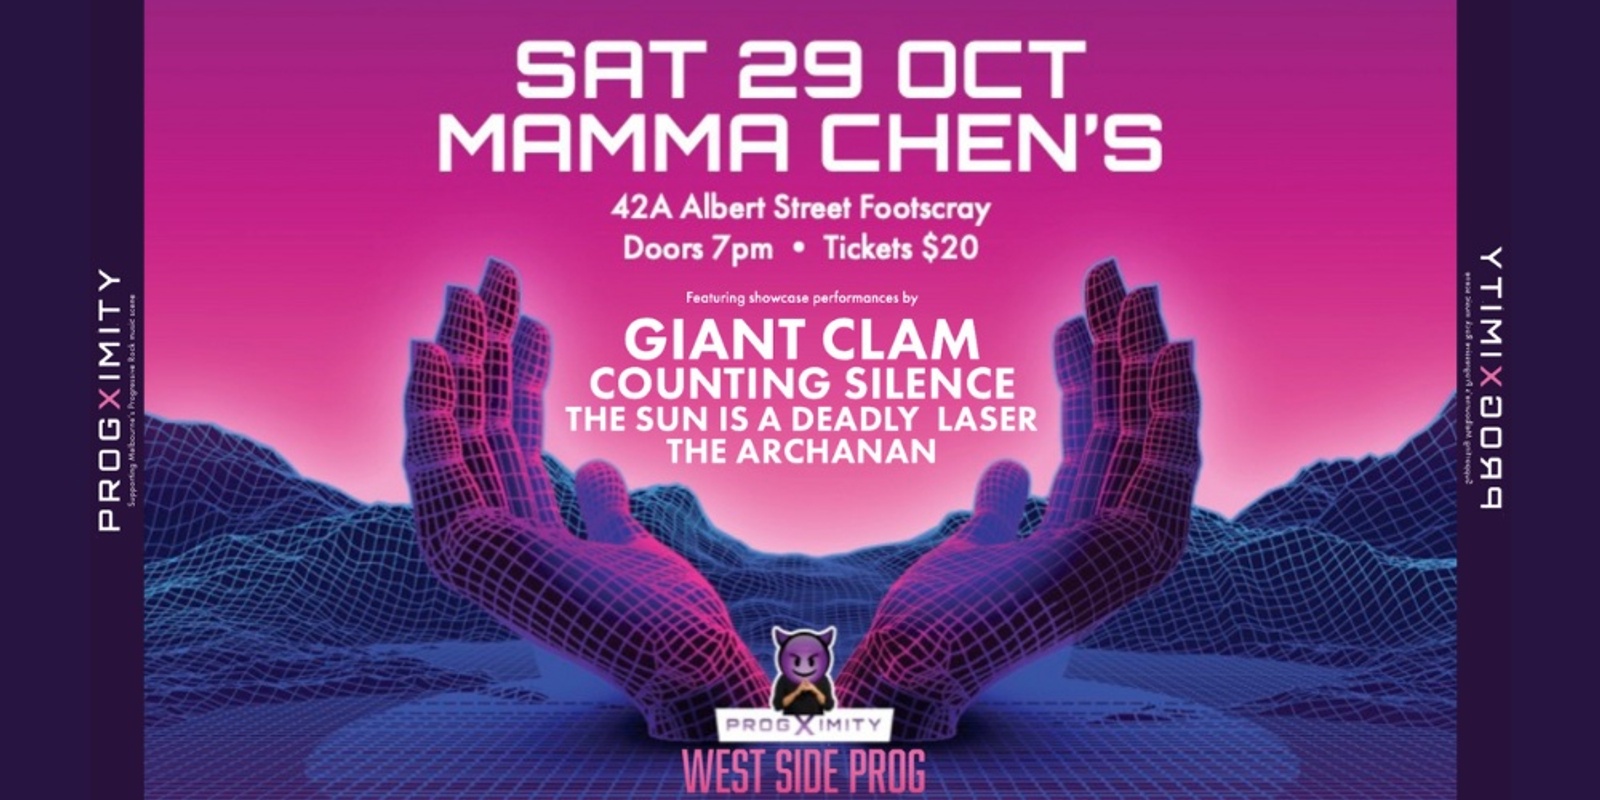 Banner image for Progximity - WEST SIDE PROG - Mamma Chen's